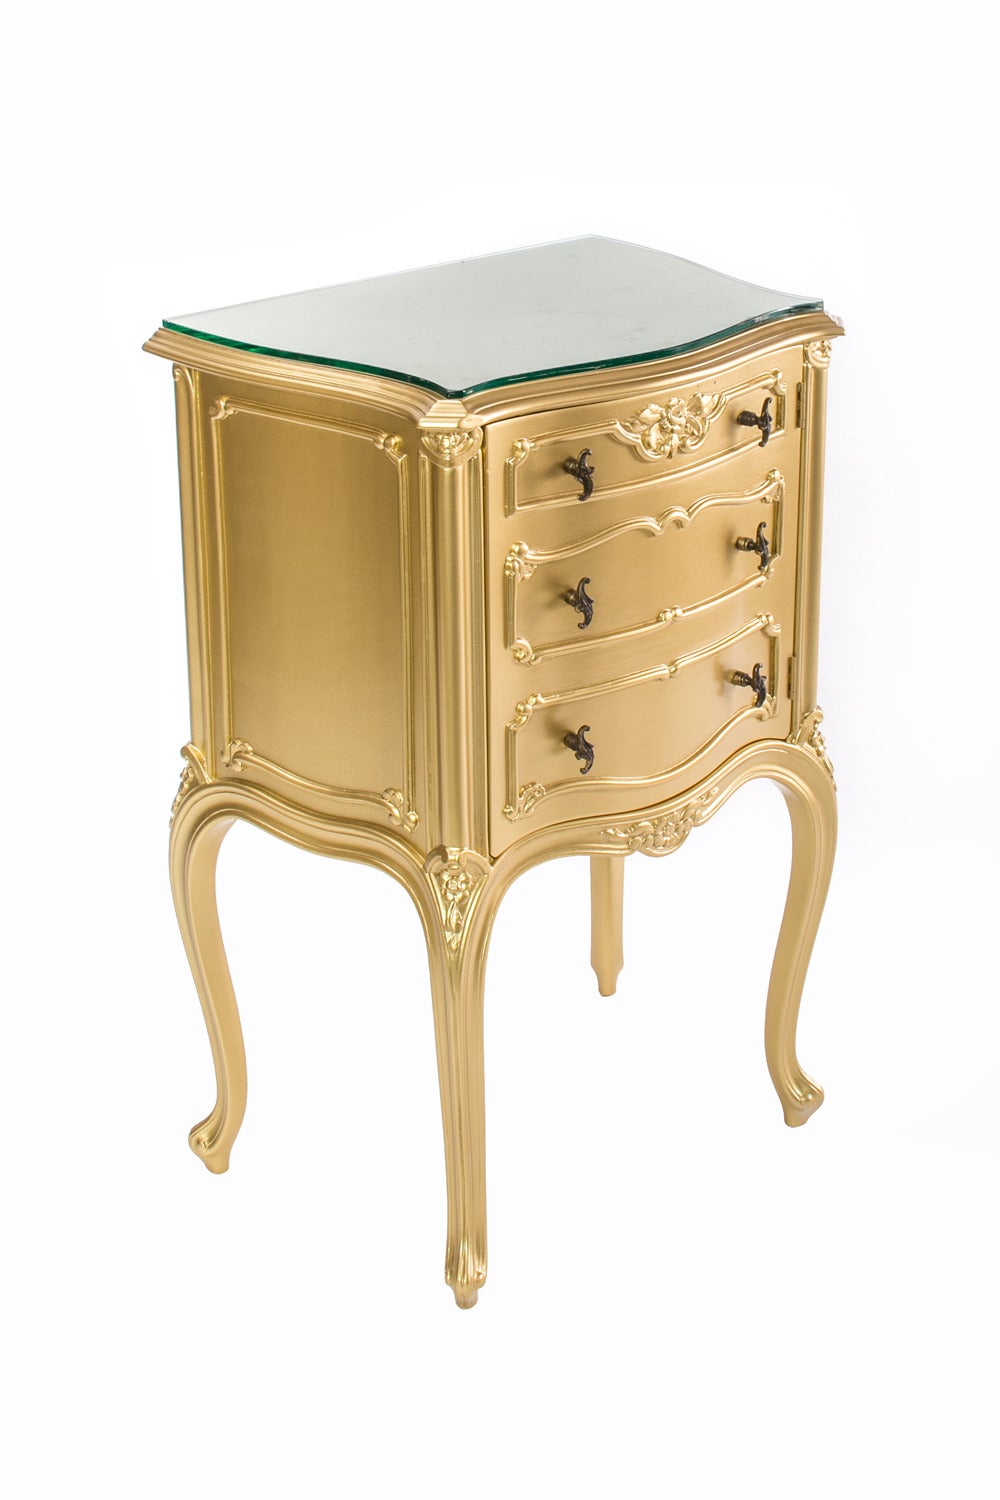 The timeless elegance of the Baroque style has been executed in a beautifully designed frame with gold leaf detail and hand-painted finishes make it the perfect night stand.

This ornate Louis XV styled 1 door, 1 self side tables are handmade and